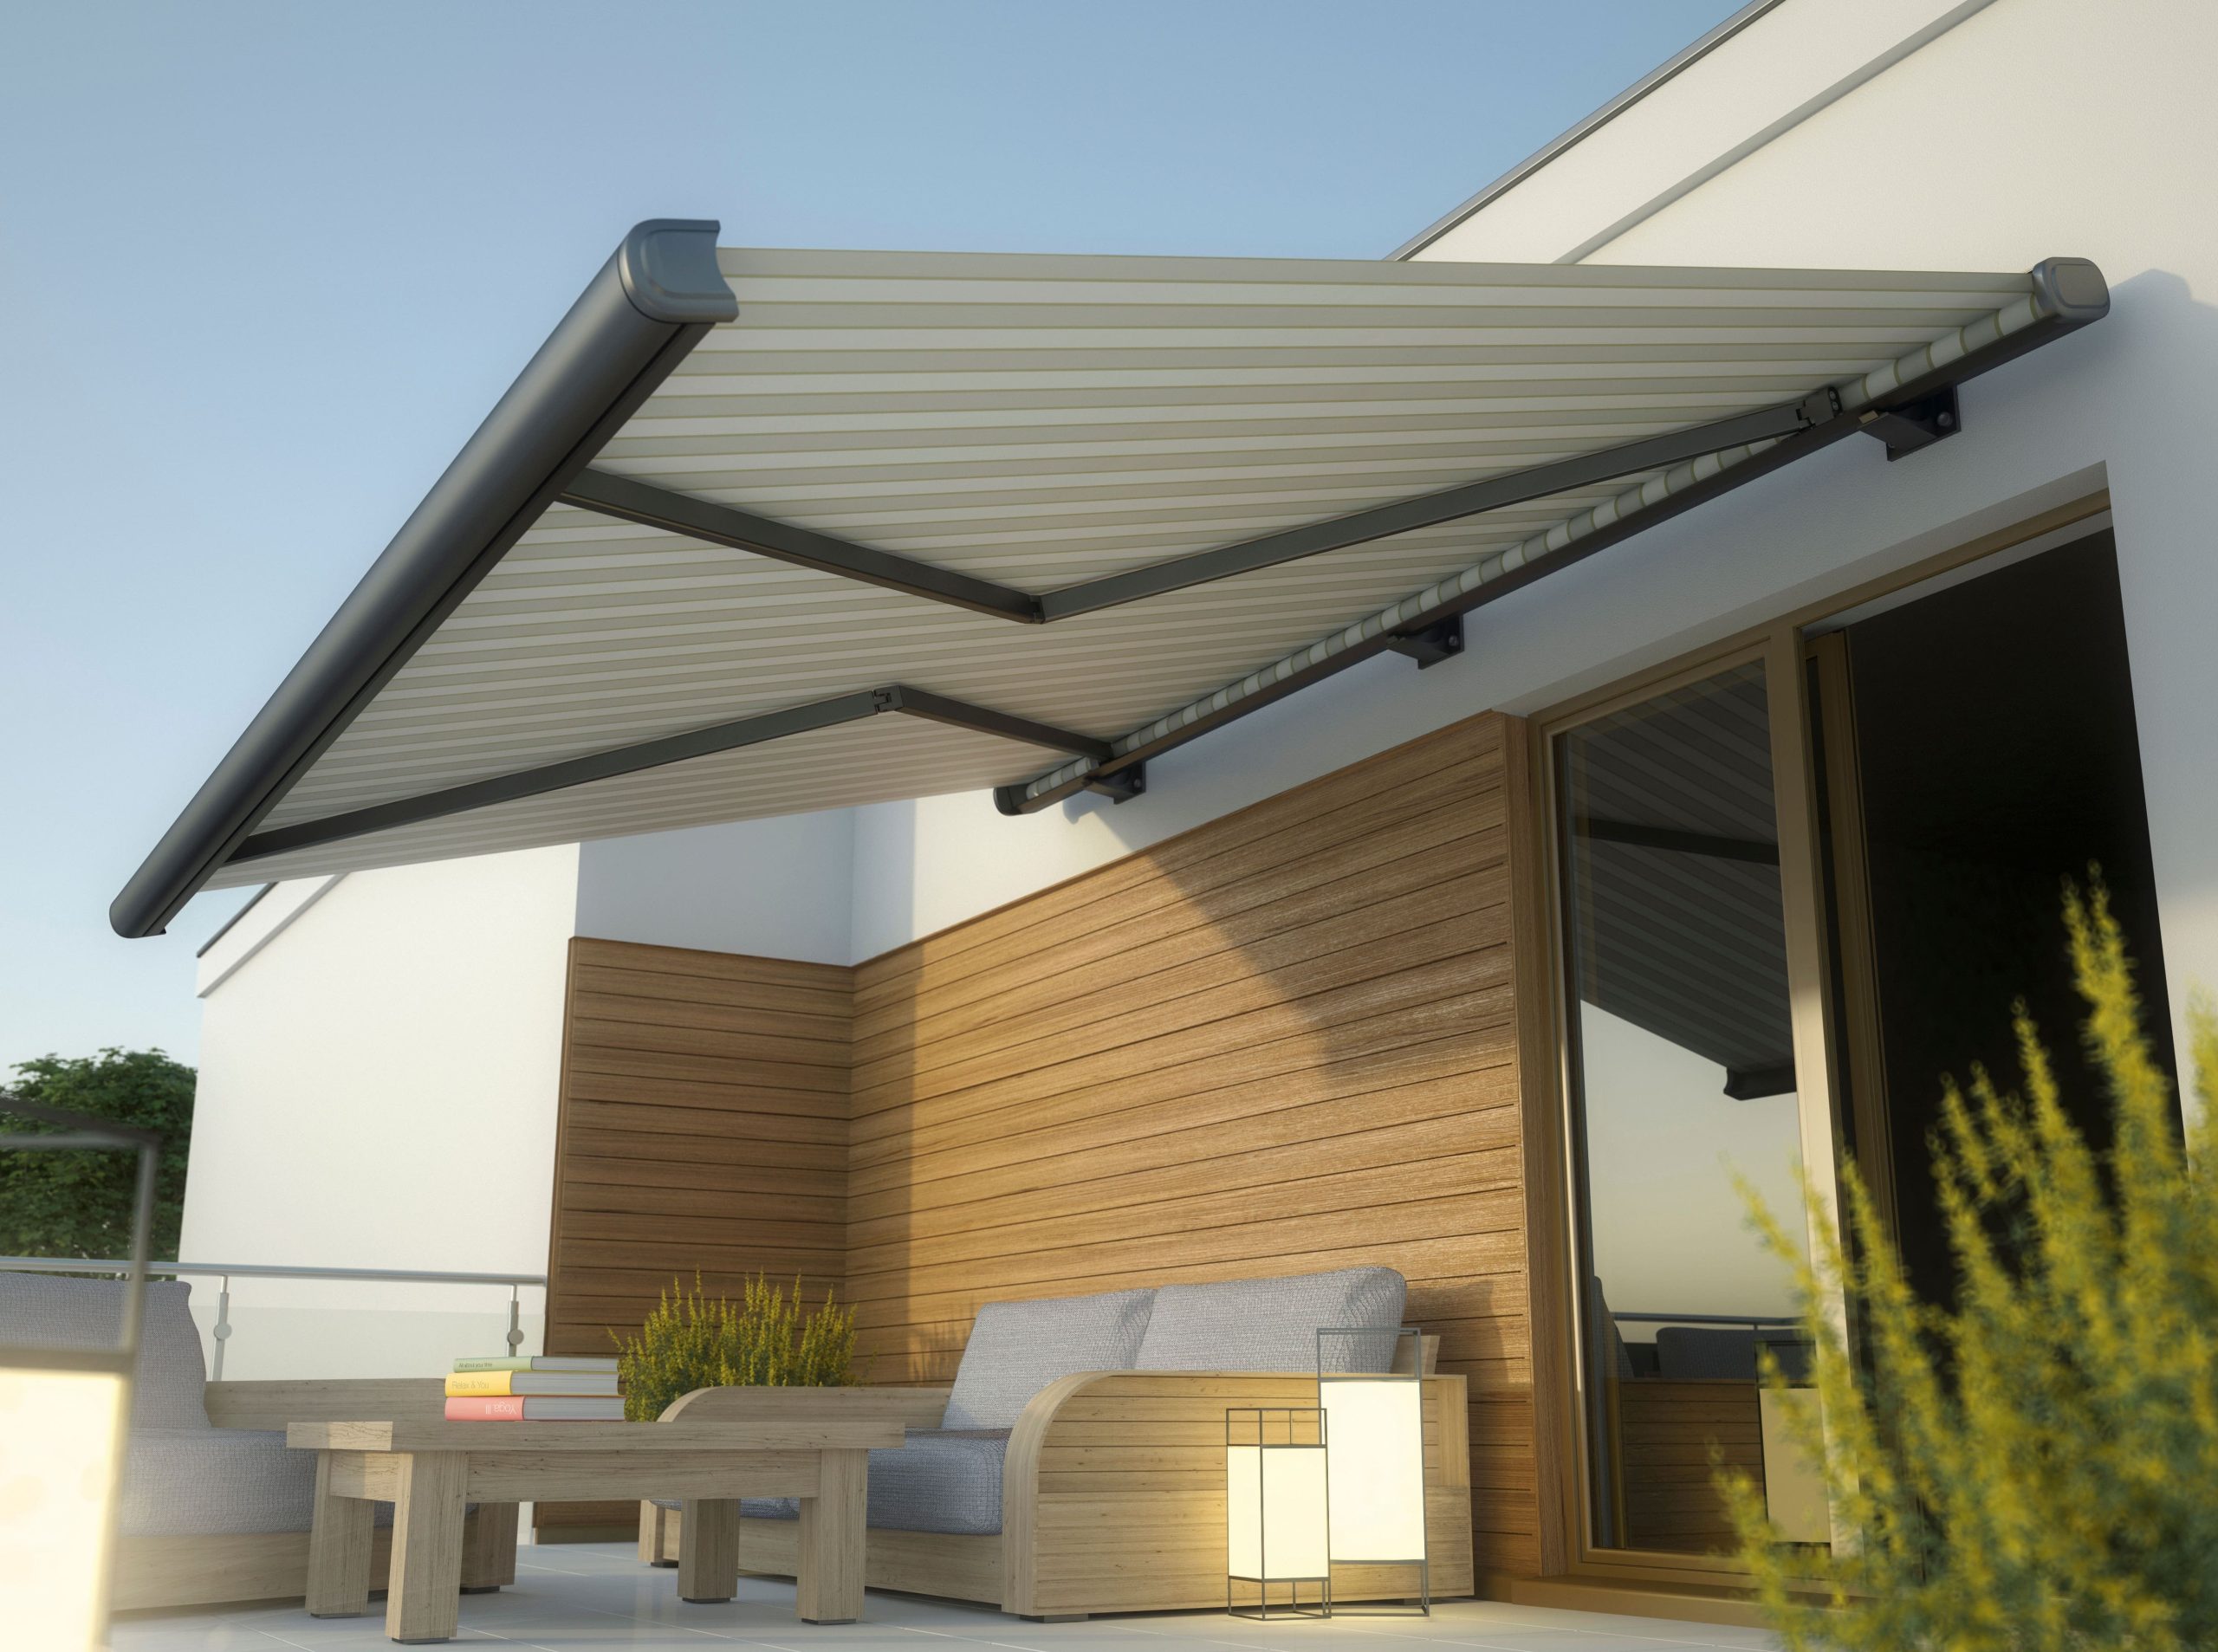 Convenient retracable awning for outdoor space in Panama City, FL.